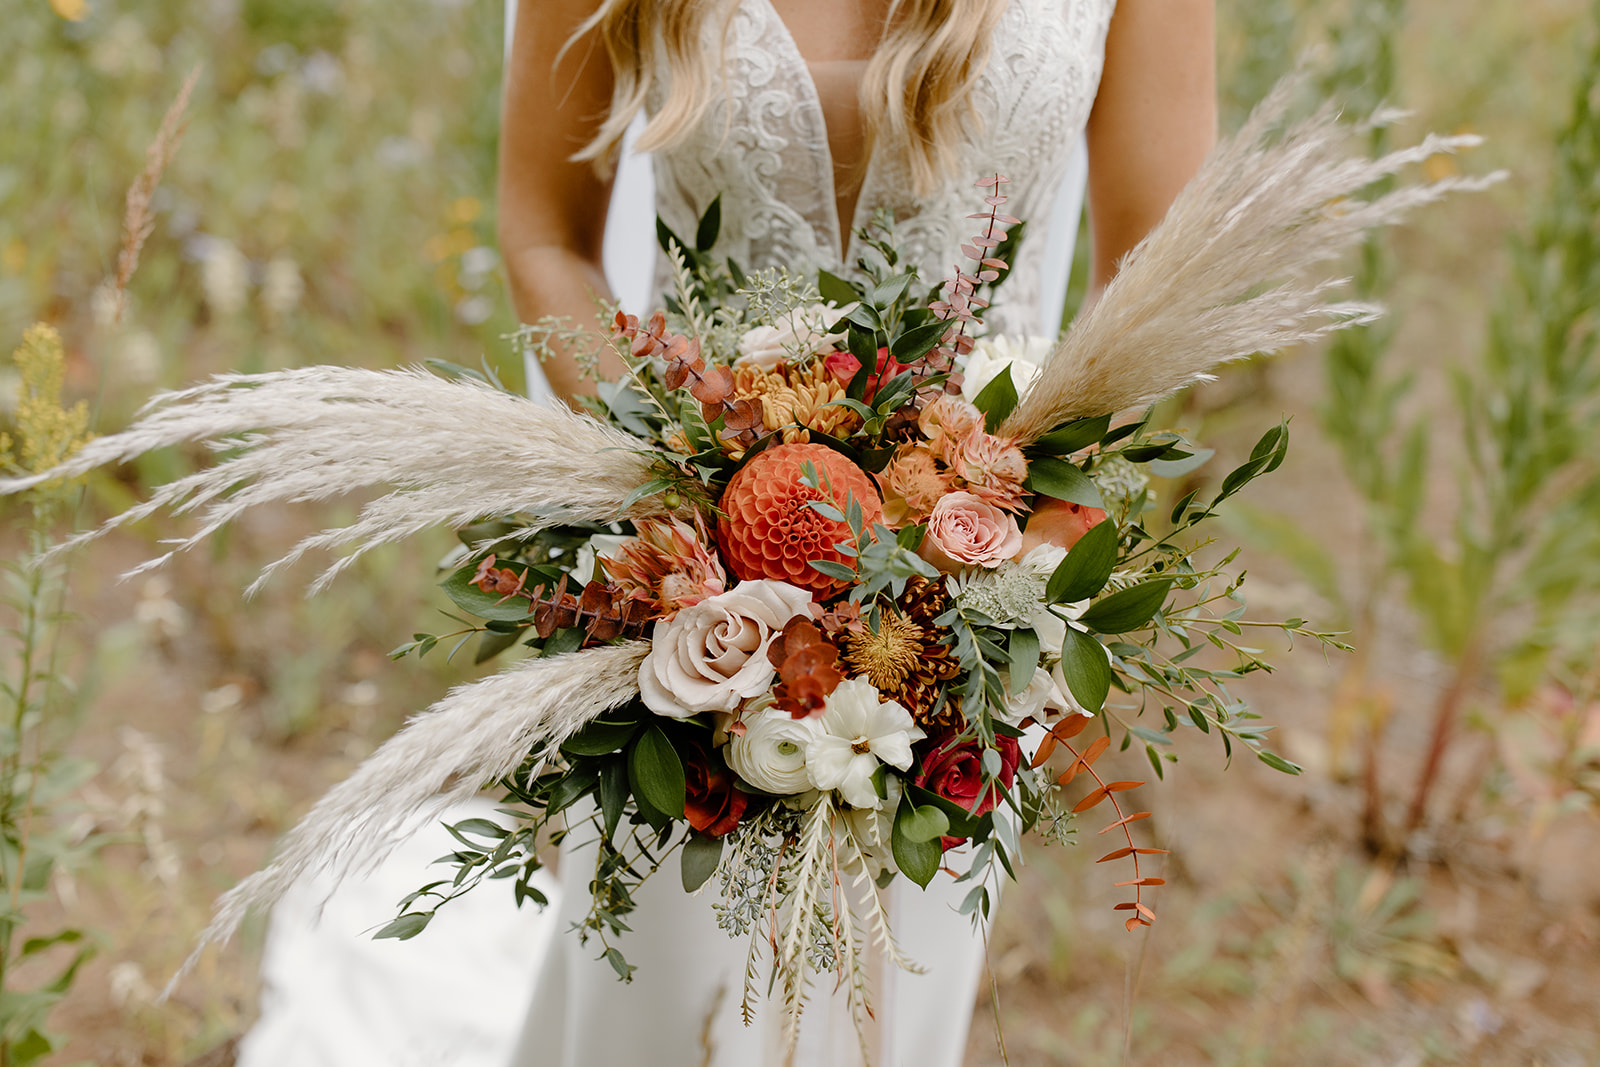 Bride holding her bouquet with pampas grass